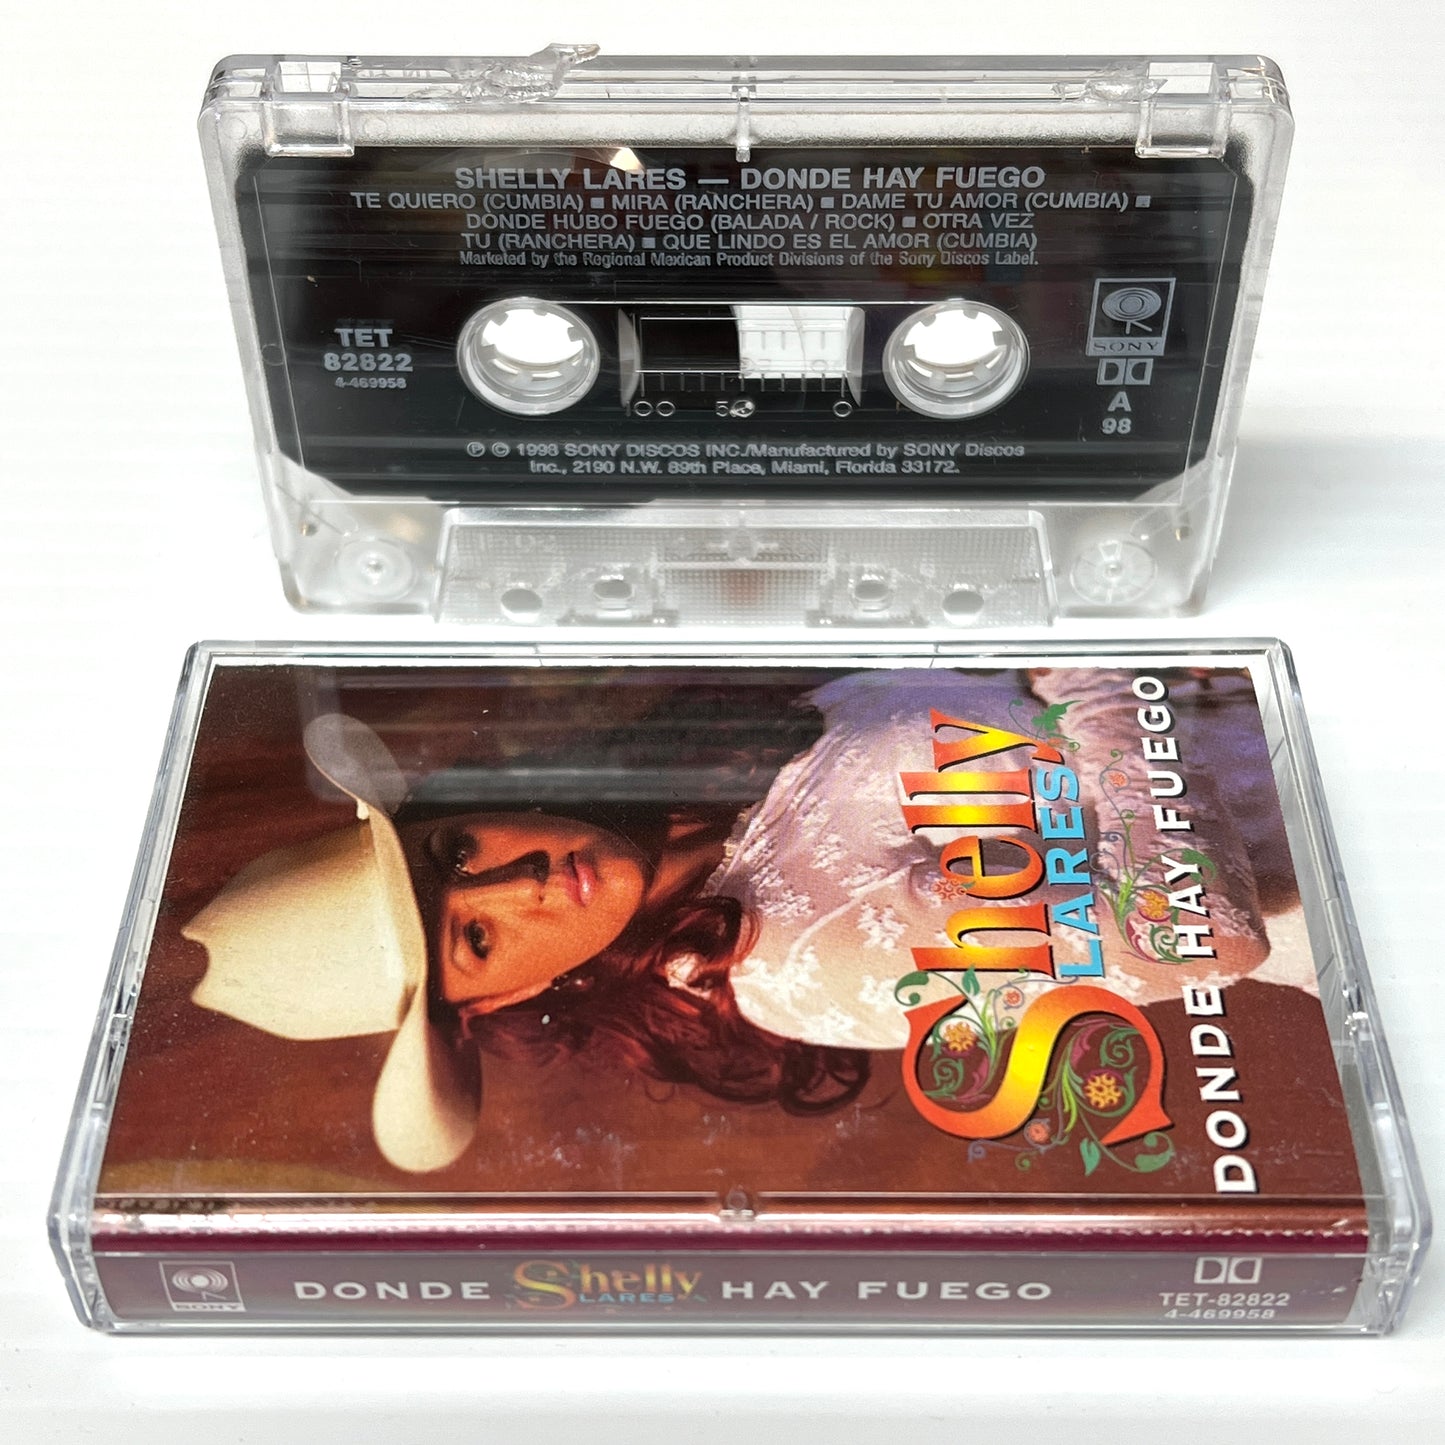 Shelly Lares - Donde Hay Fuego (Cassette)